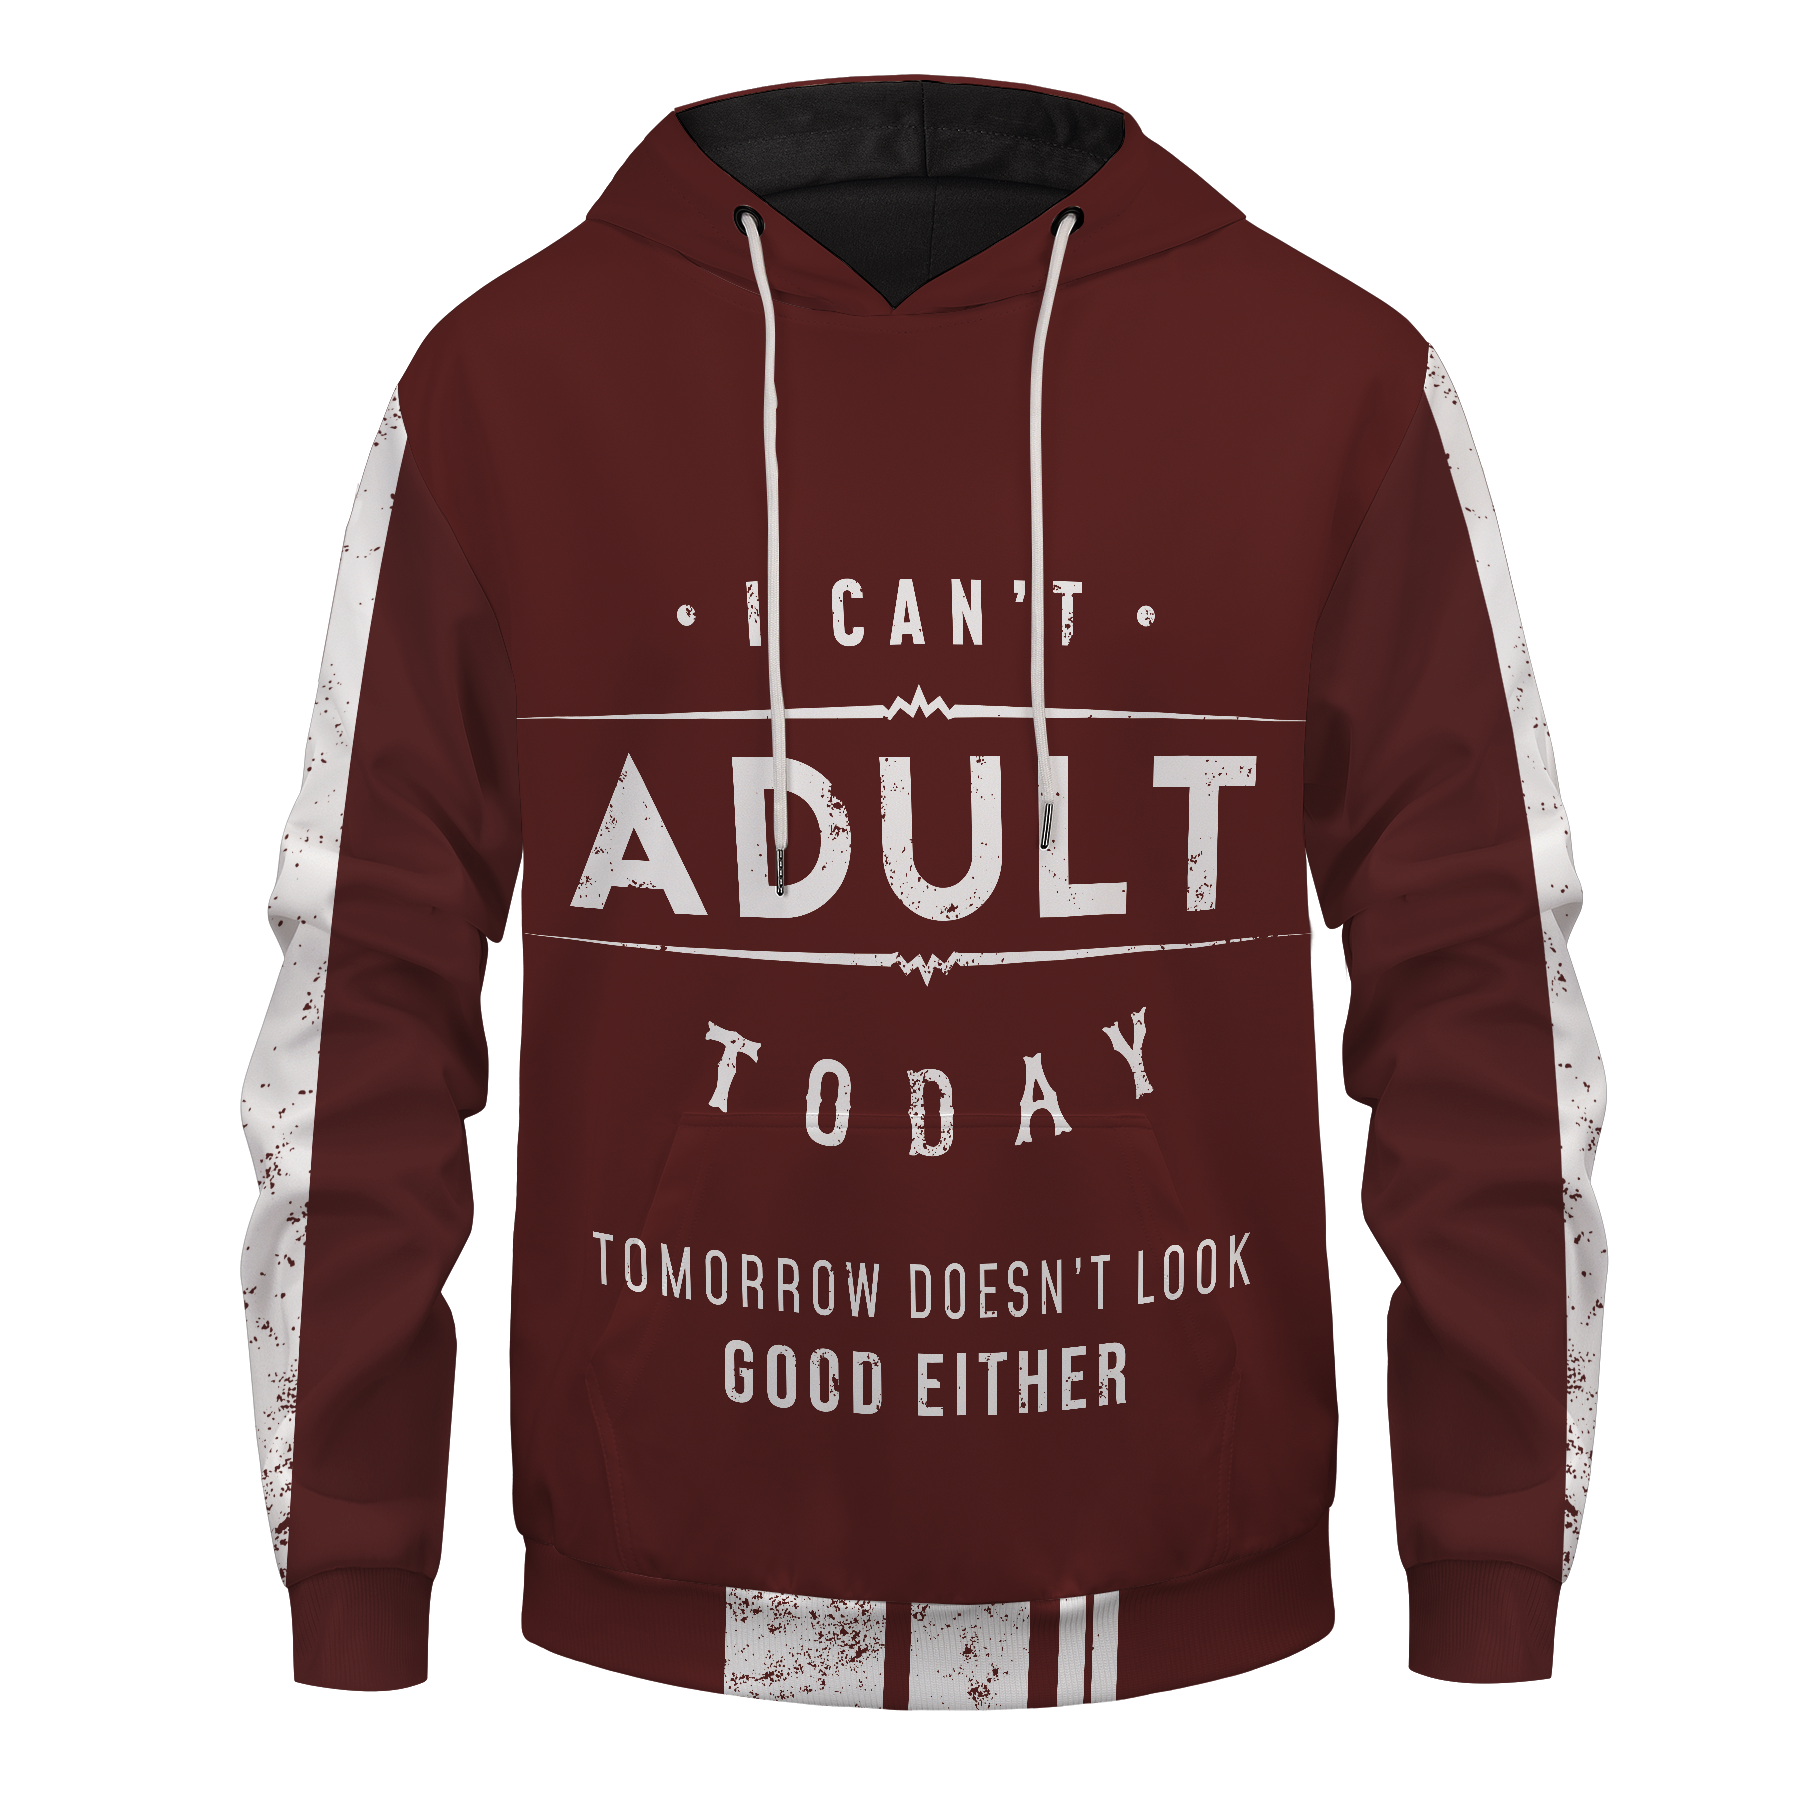 Cant Adult Today Unisex Pullover Hoodie